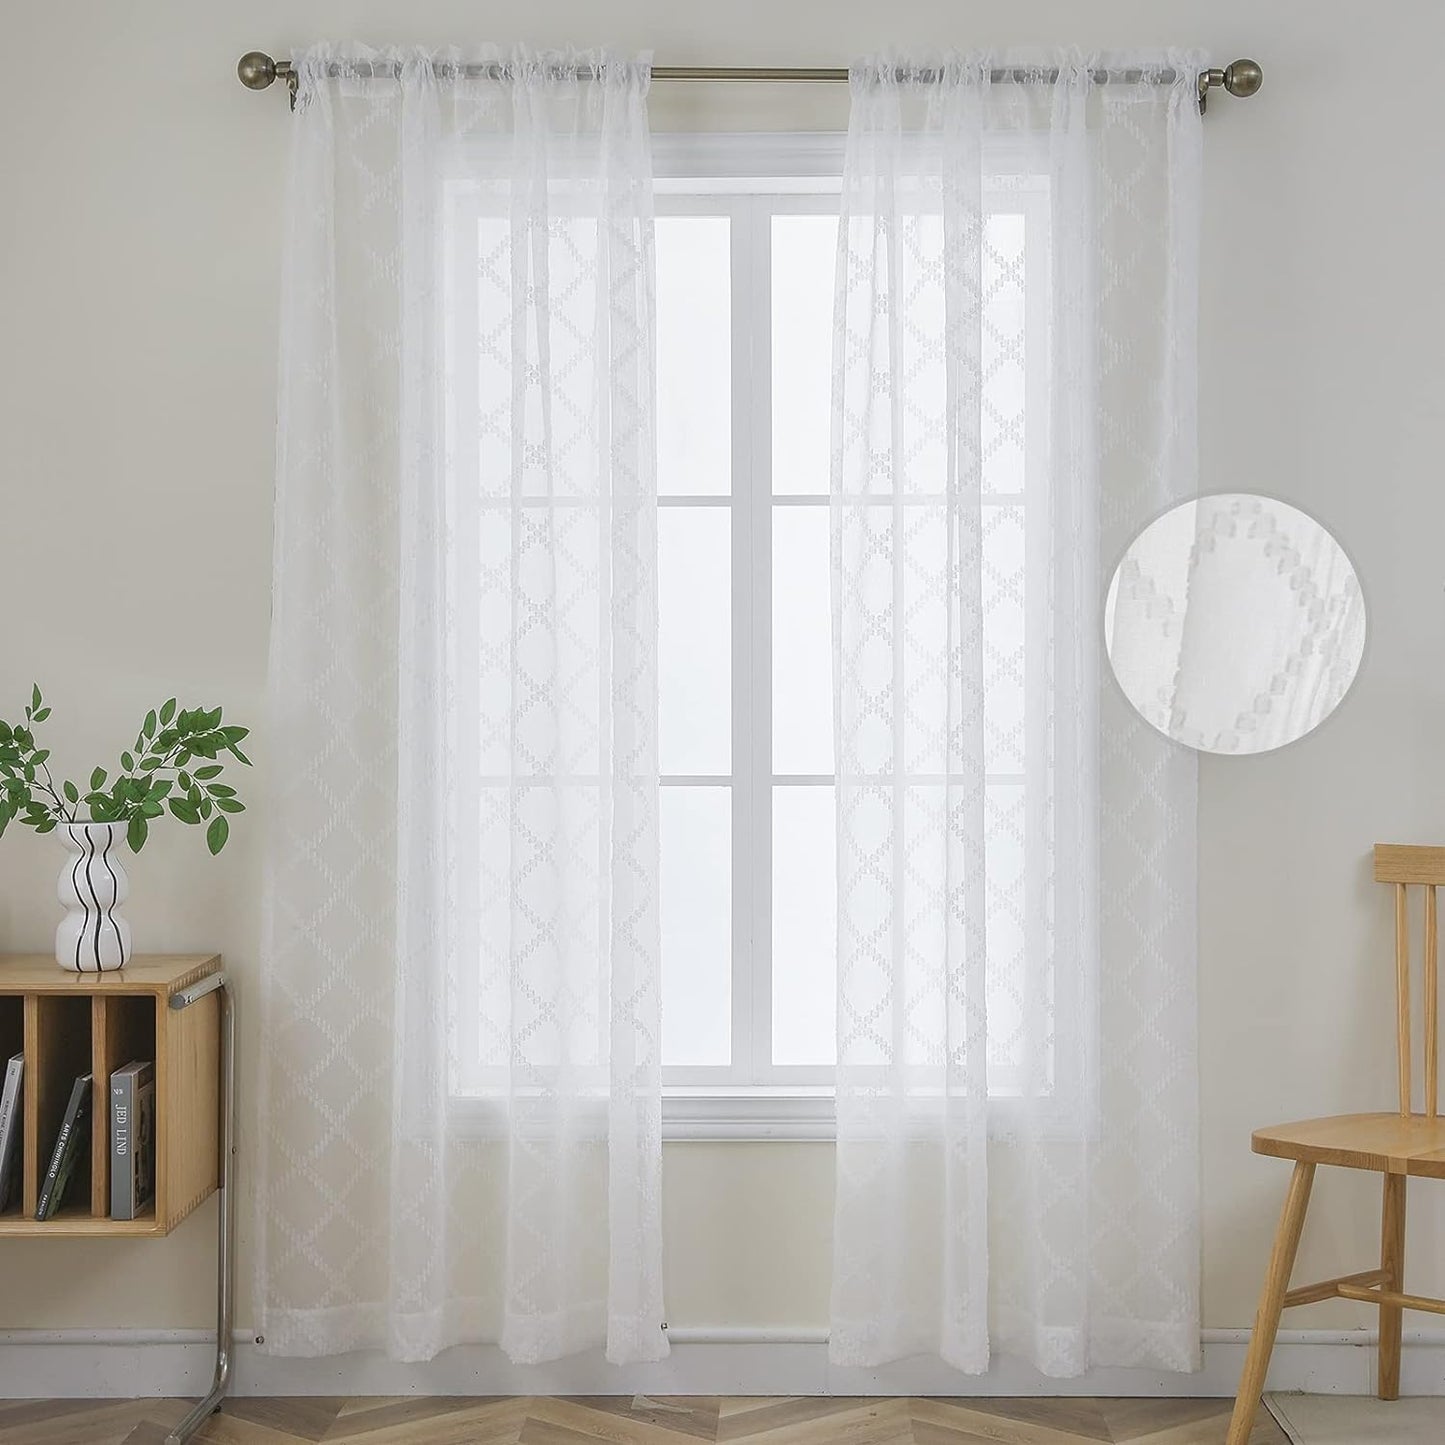 Joydeco White Sheer Curtains 63 Inch Length 2 Panels Set, Rod Pocket Long Sheer Curtains for Window Bedroom Living Room, Lightweight Semi Drape Panels for Yard Patio (54X63 Inch, off White)  Joydeco Trellis Embroidery-White 54W X 84L Inch X 2 Panels 